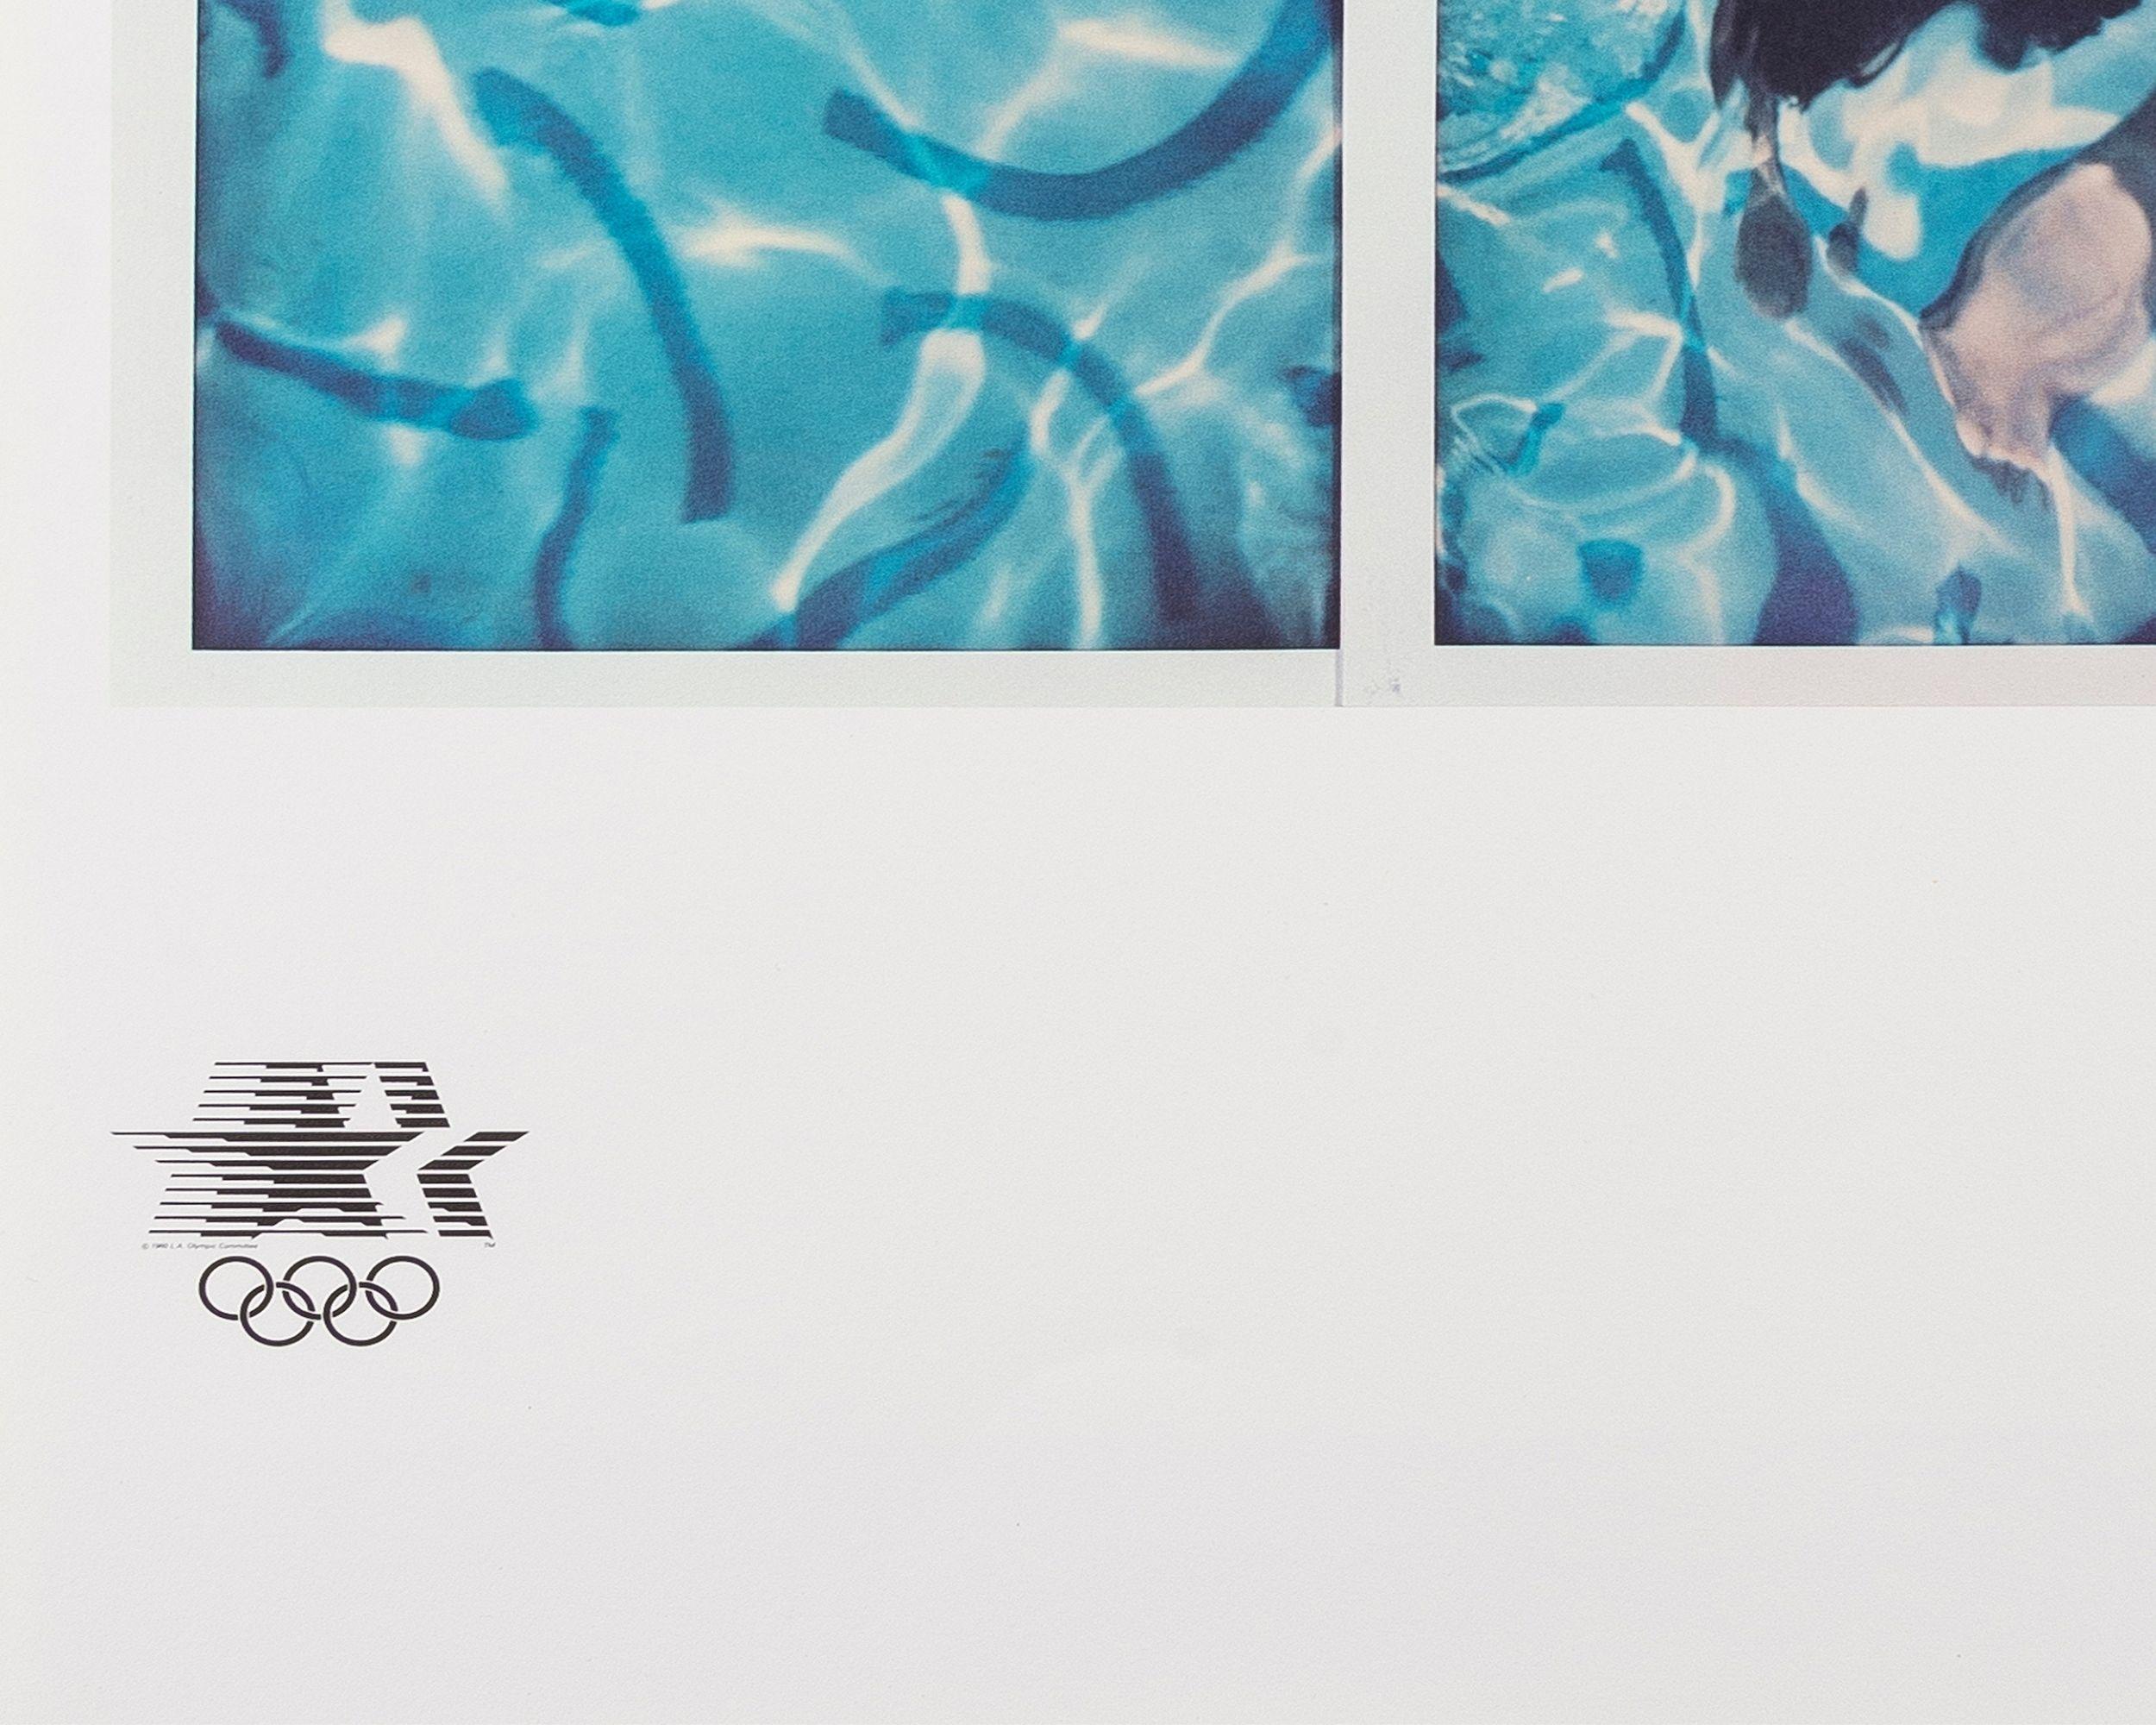 Los Angeles 1984 Olympic Games -- Lithograph, Swimming Pool by David Hockney 2